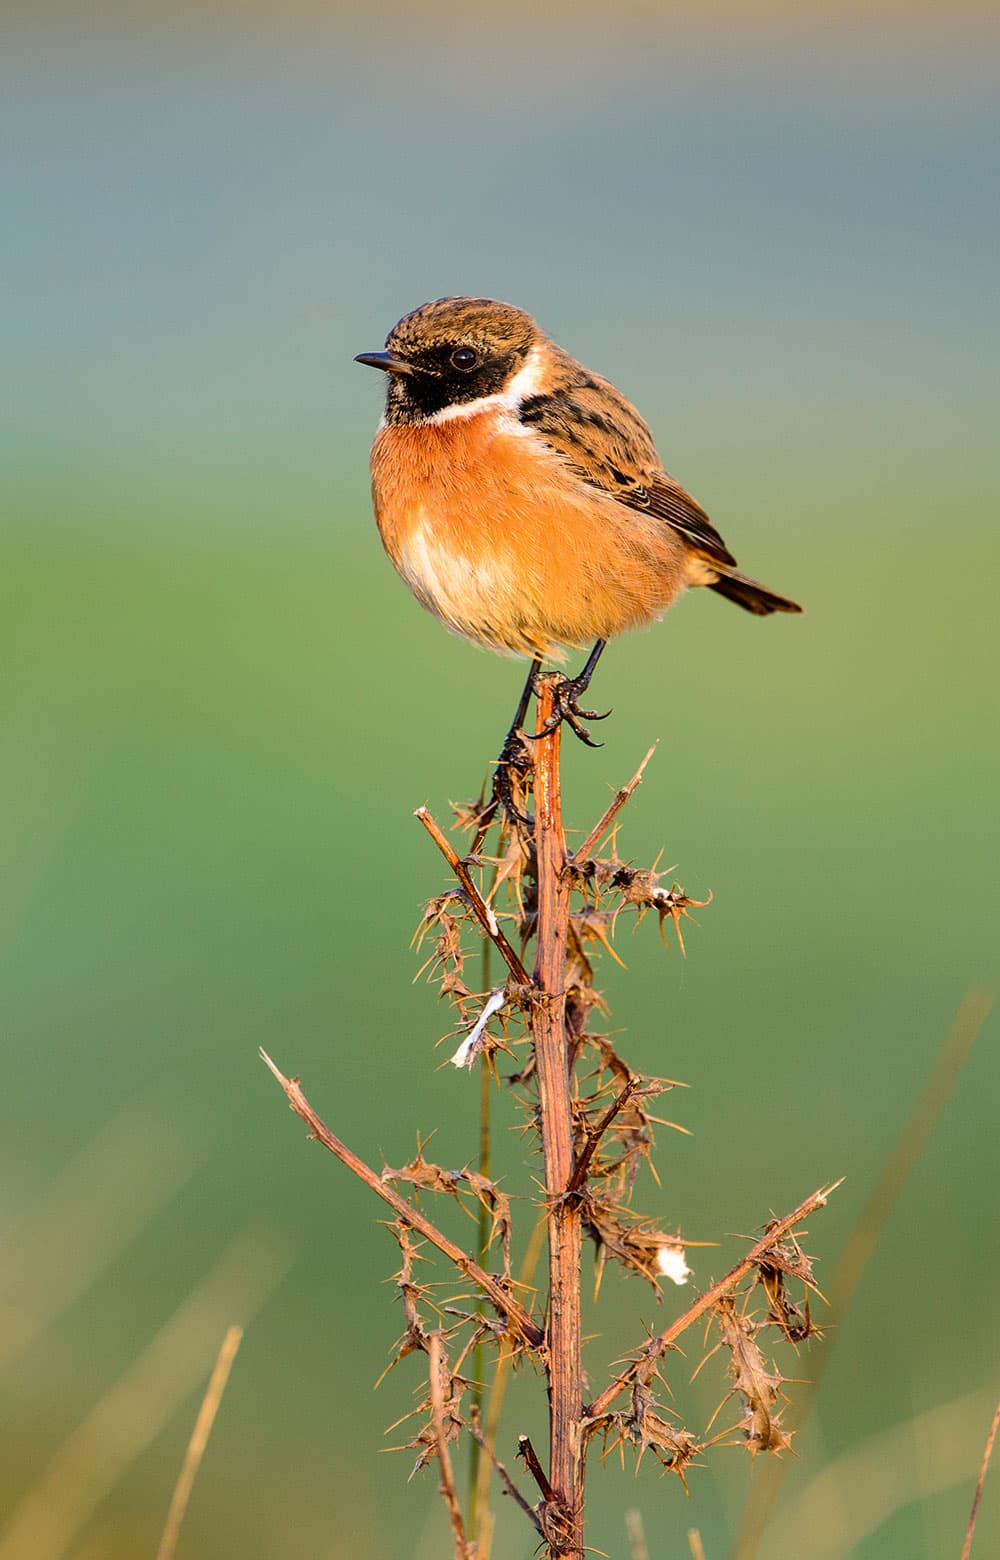 stonechats keeping focus on the birds face